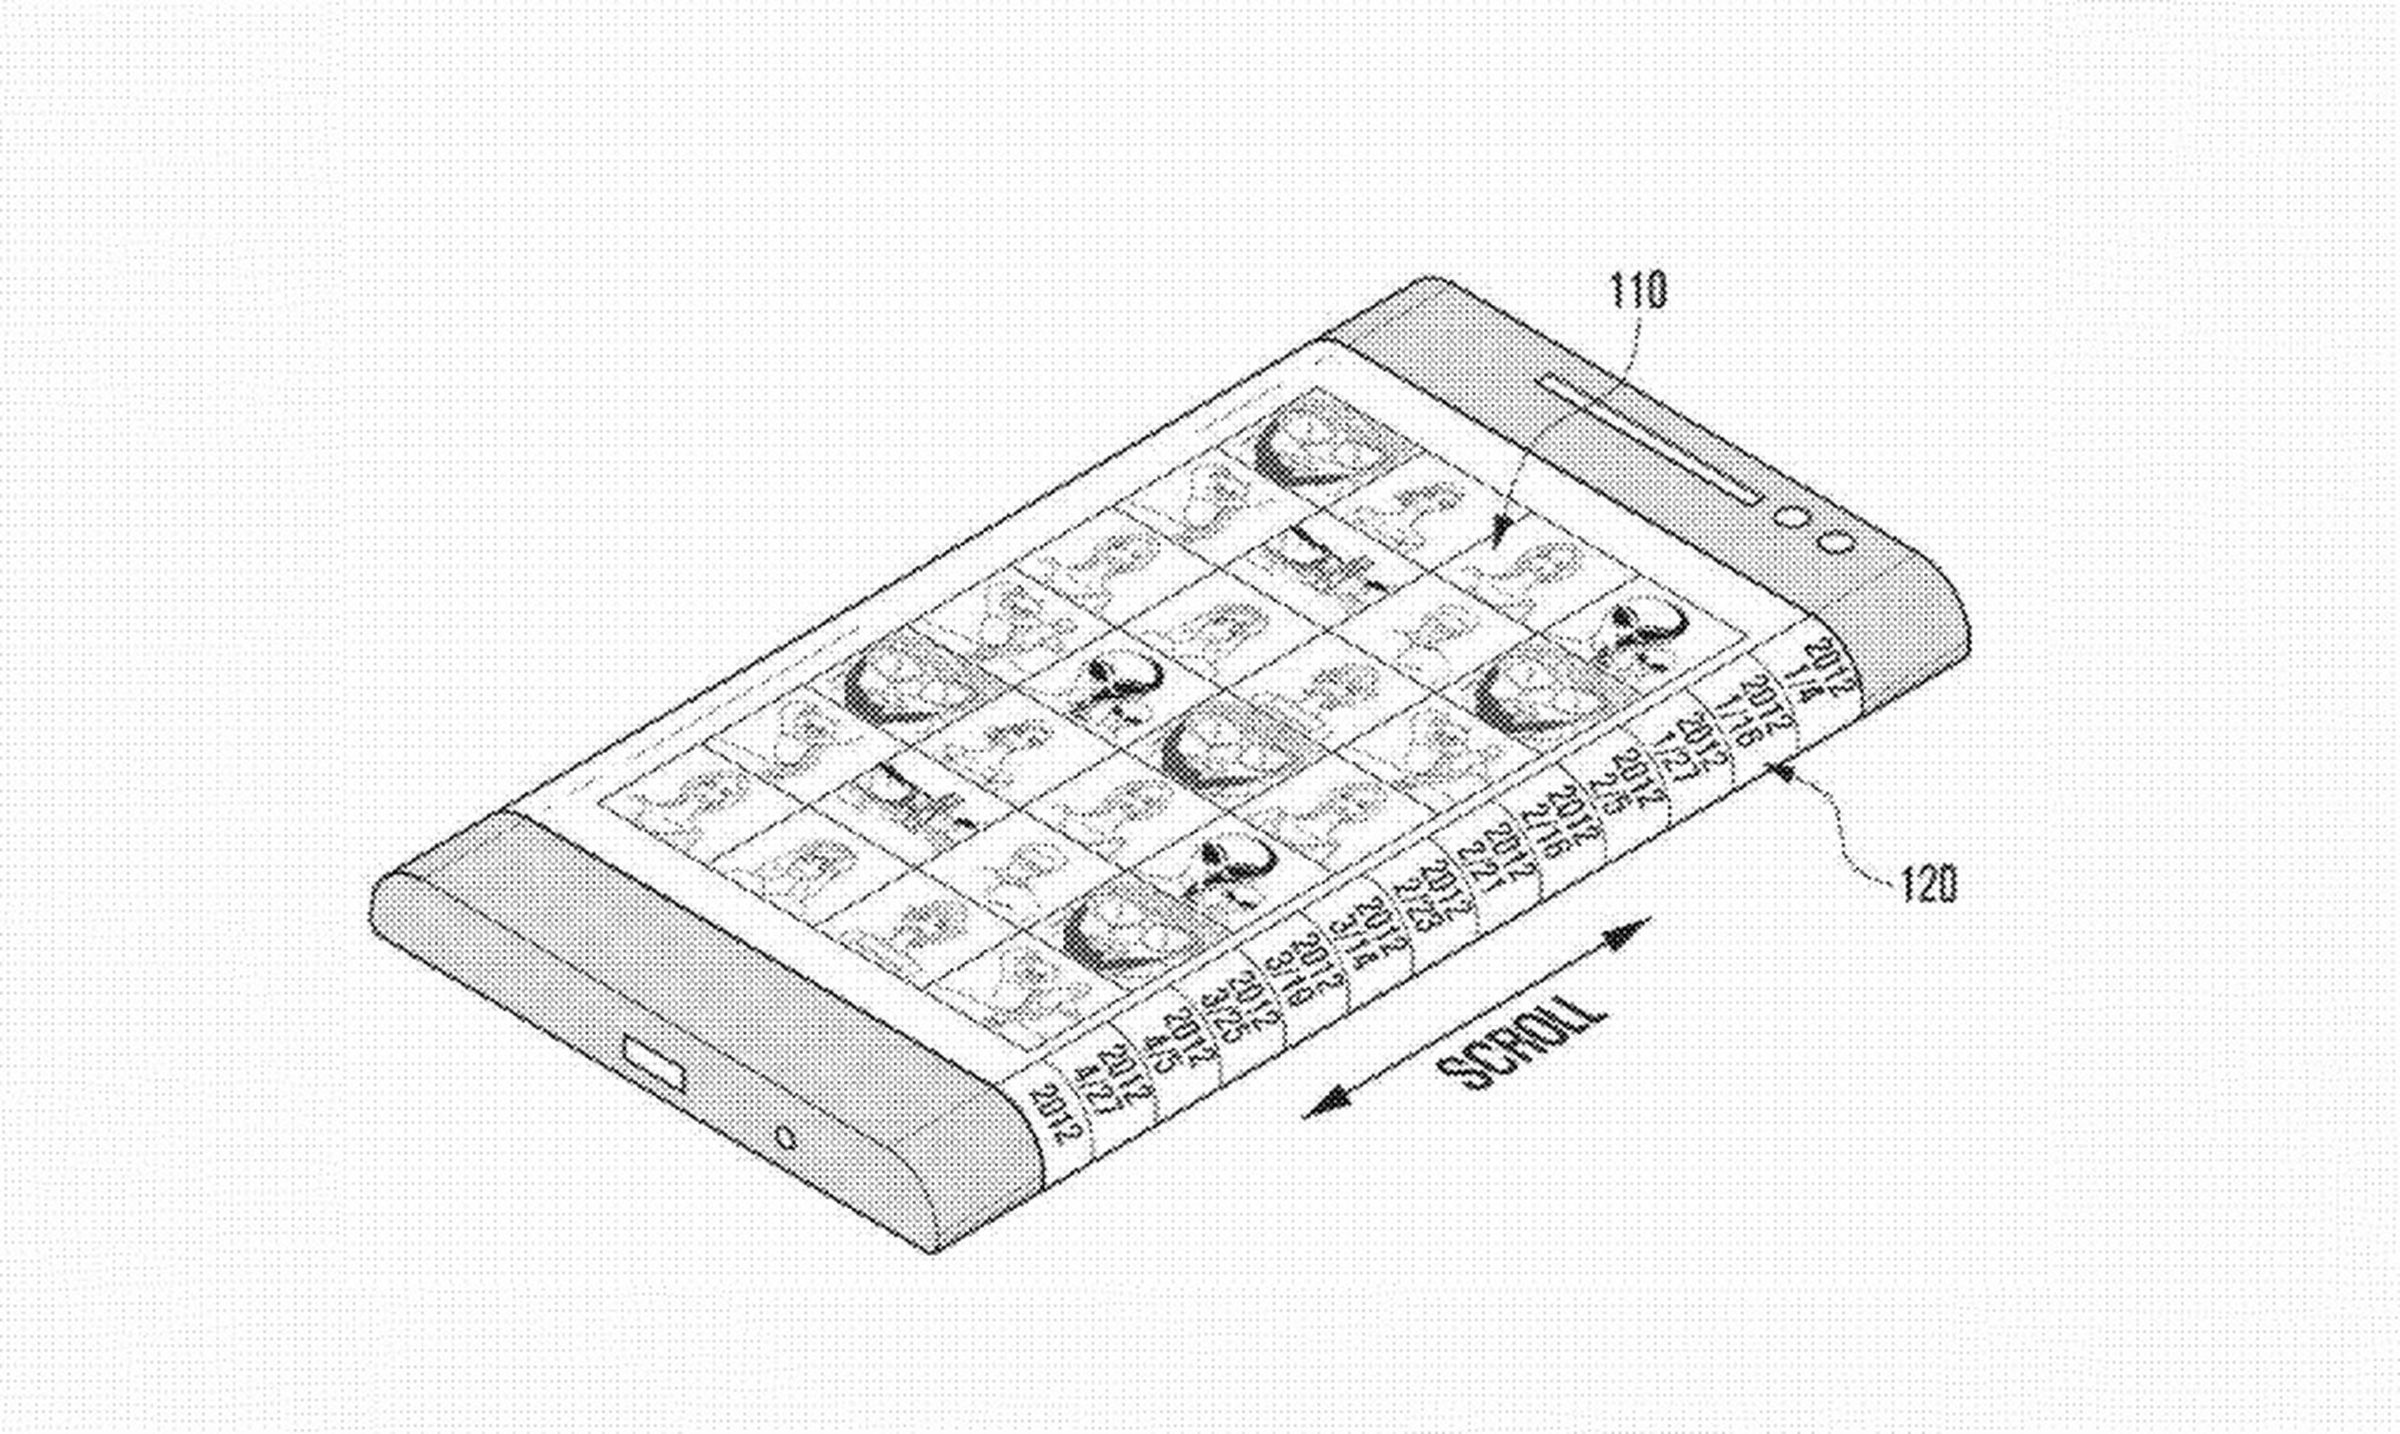 Samsung 'bended display' patent application